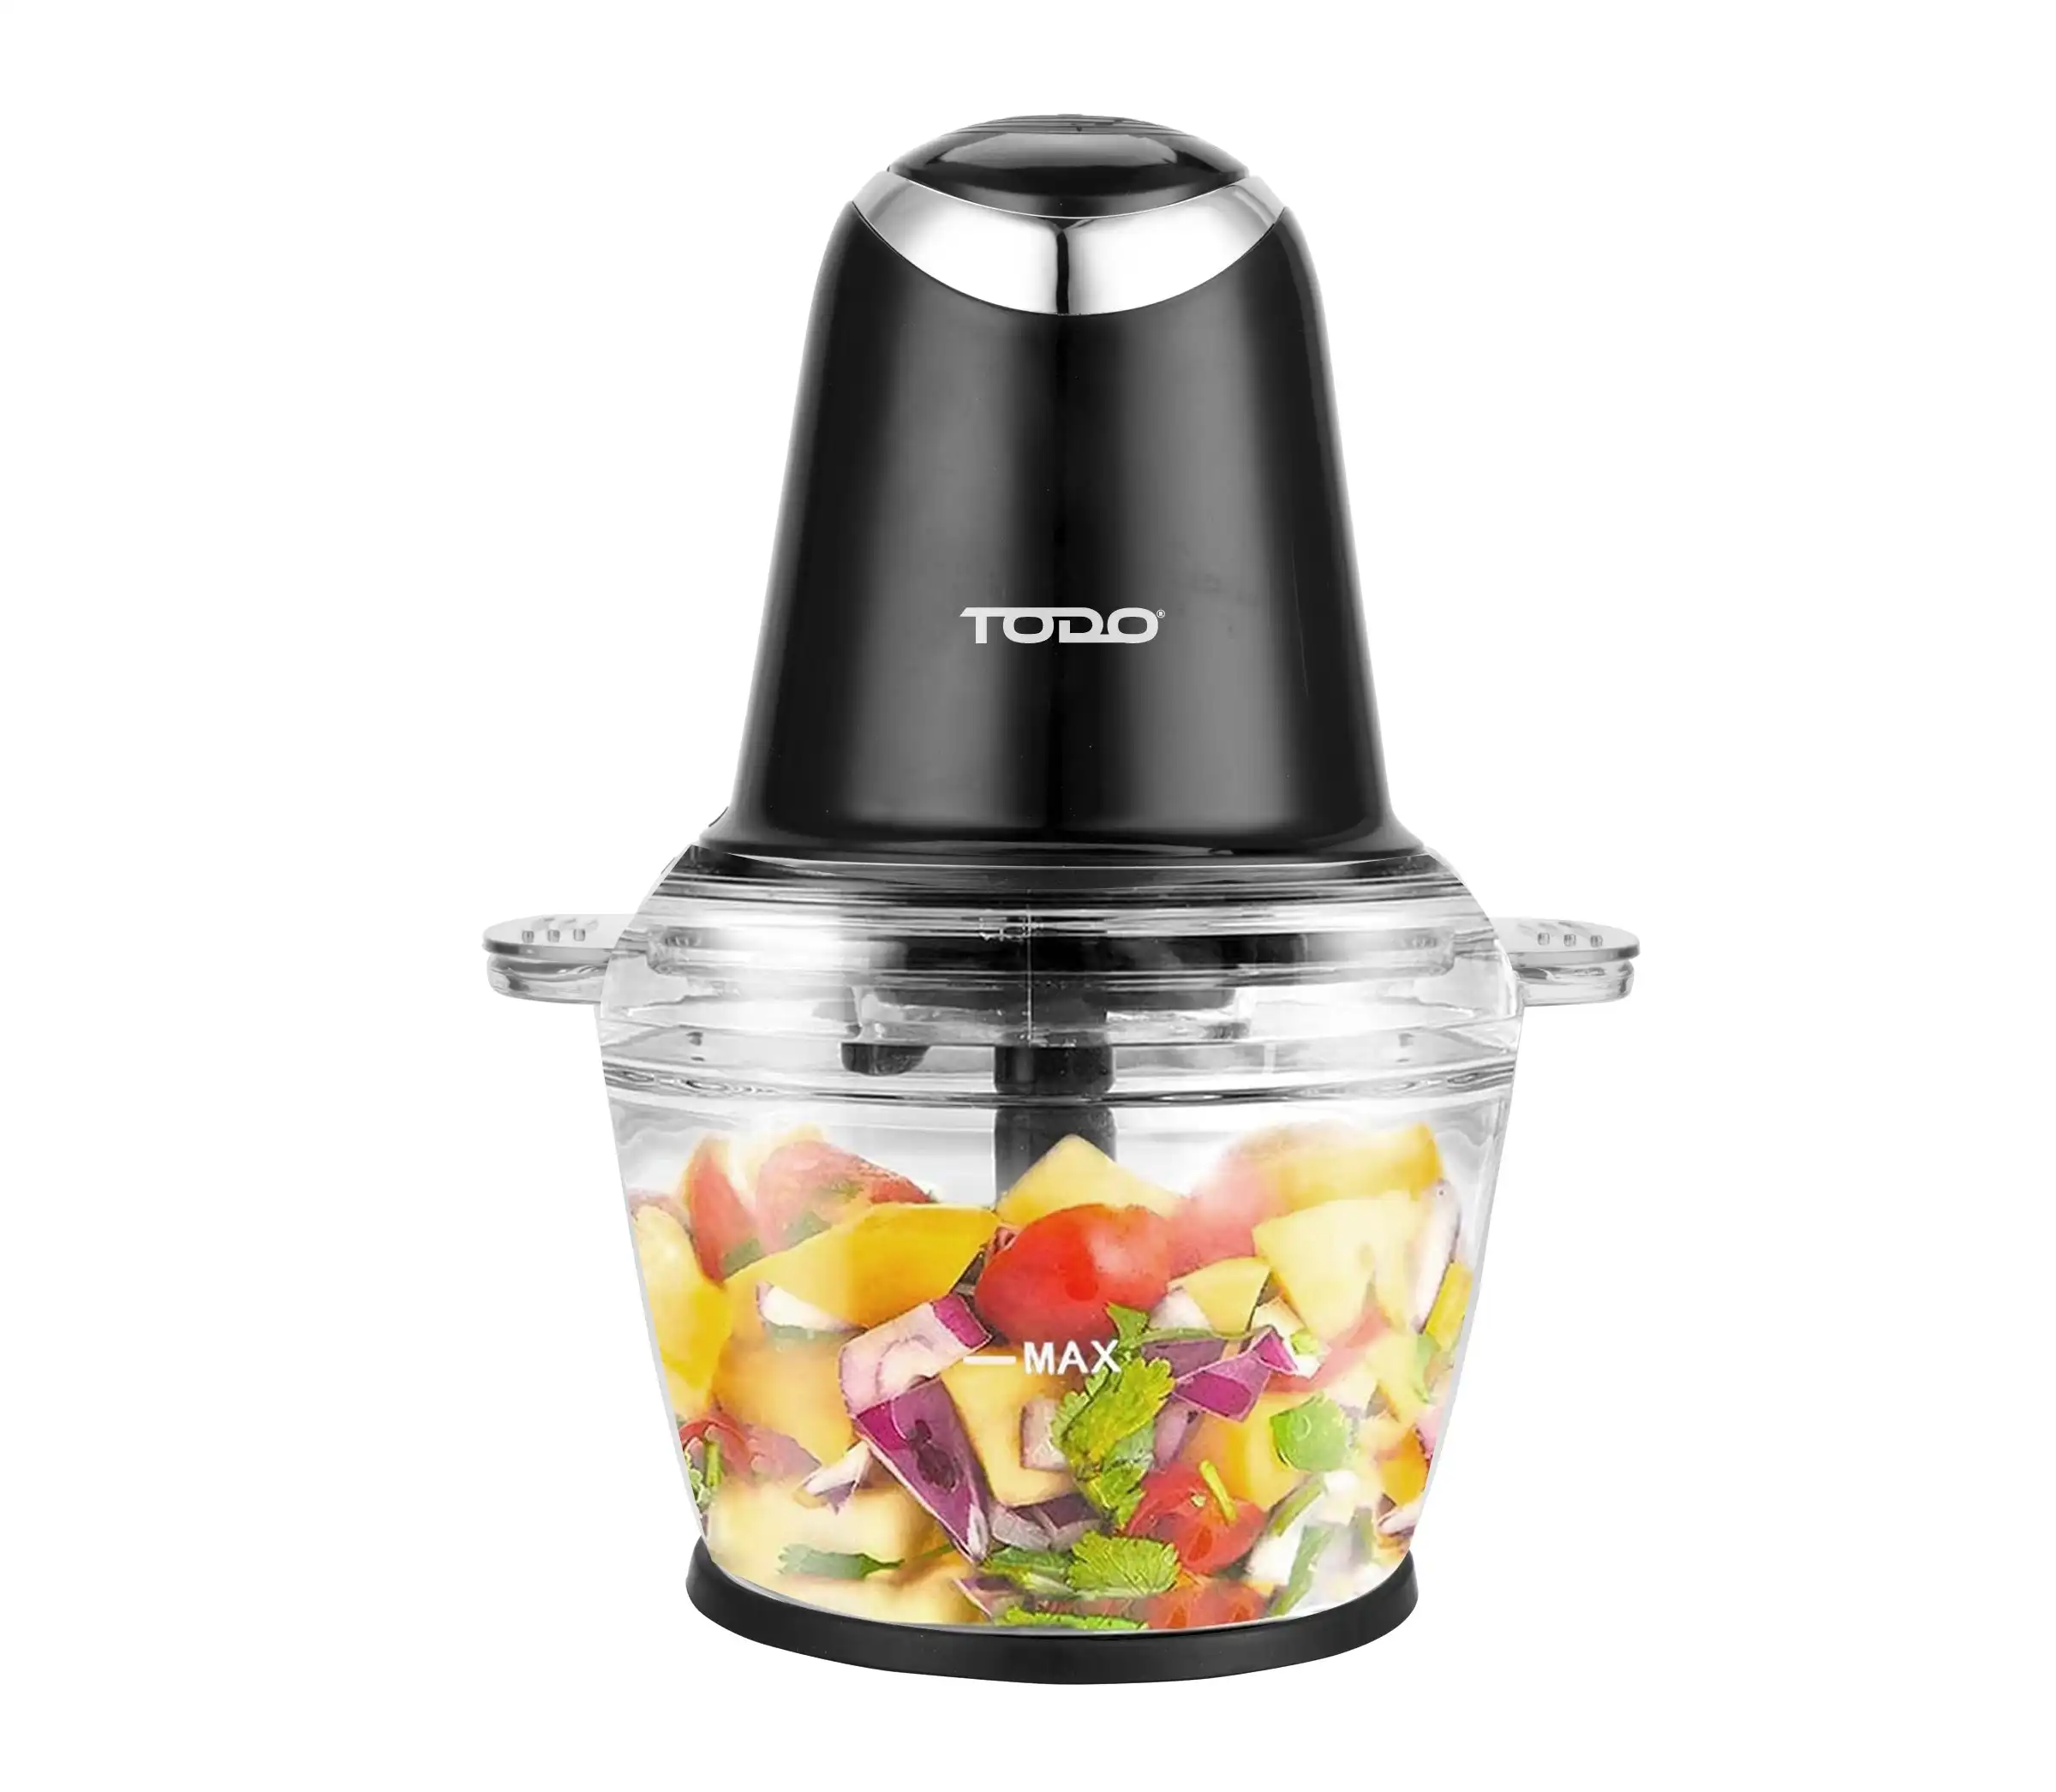 TODO 1L Food Chopper Processor Glass Bowl 2 Speed 200W Stainless Steel Blade